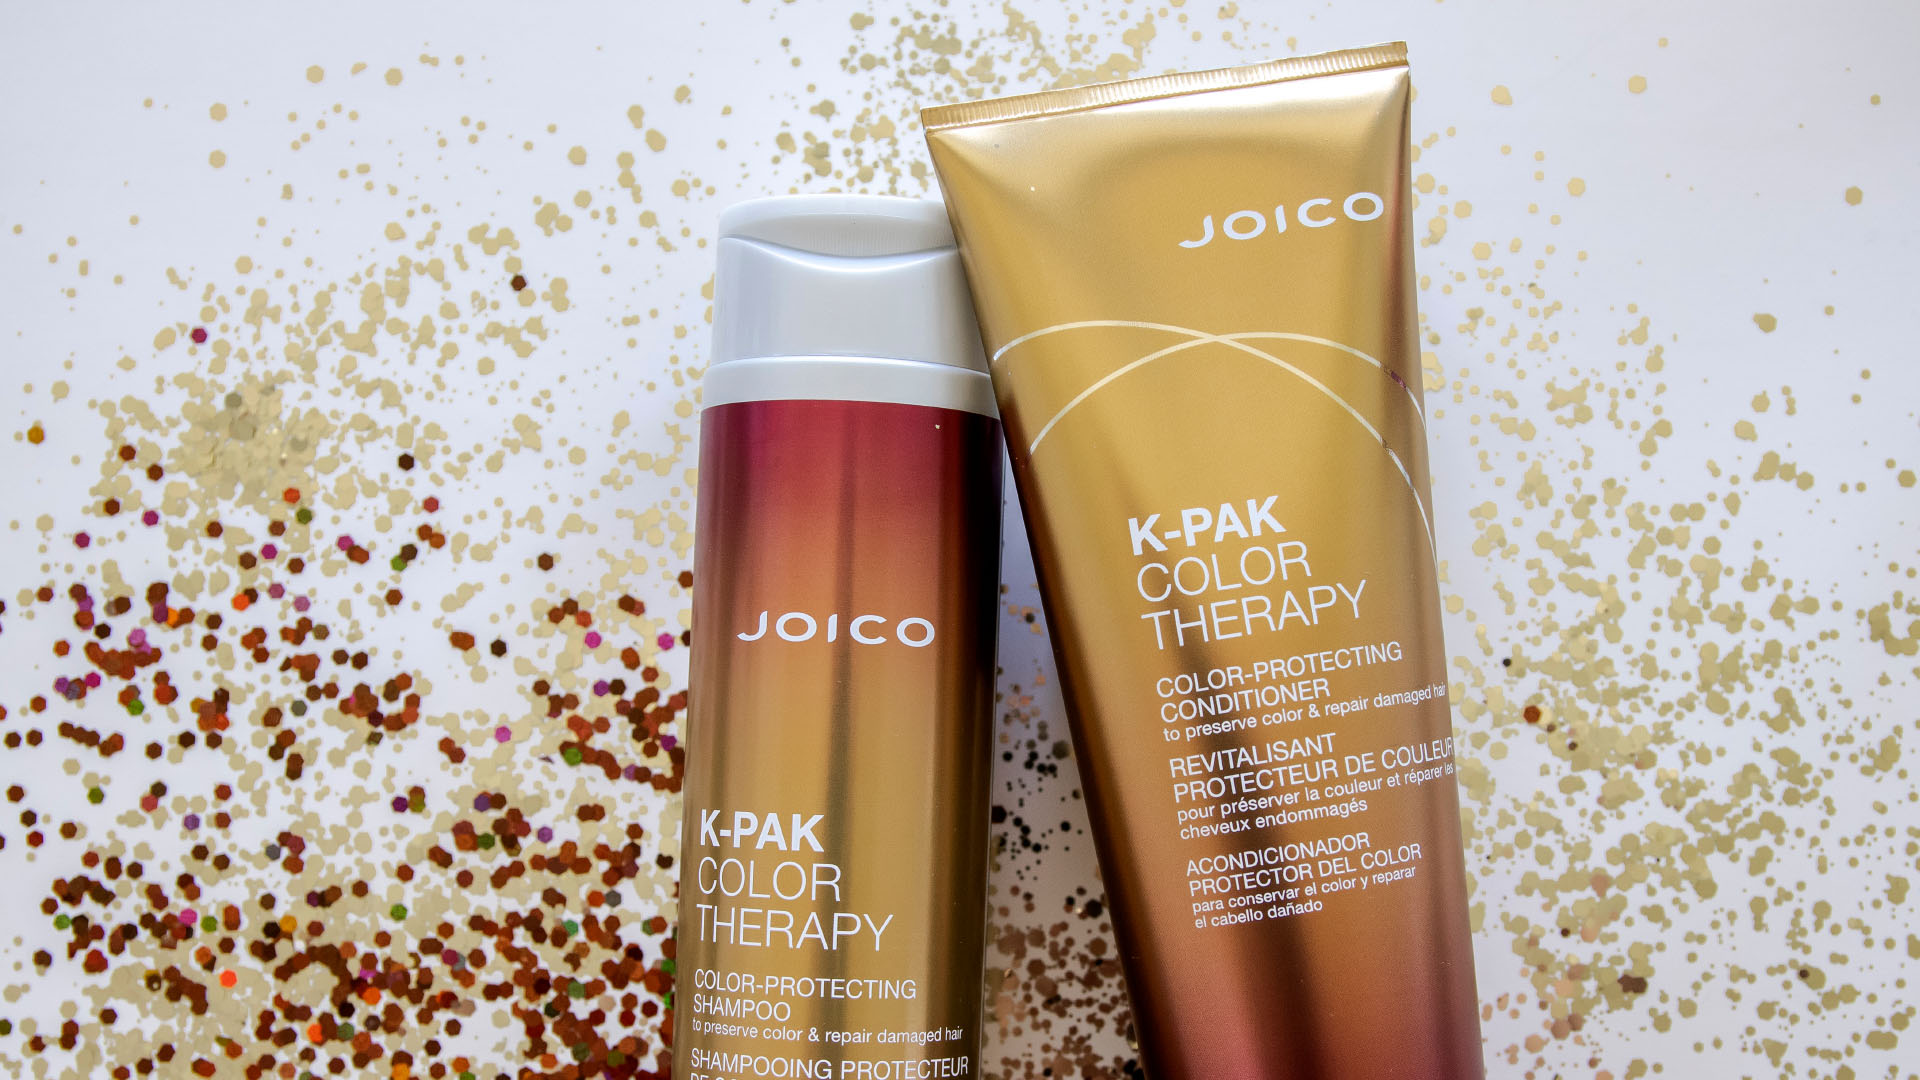 JOICO K-PAK COLOR THERAPY